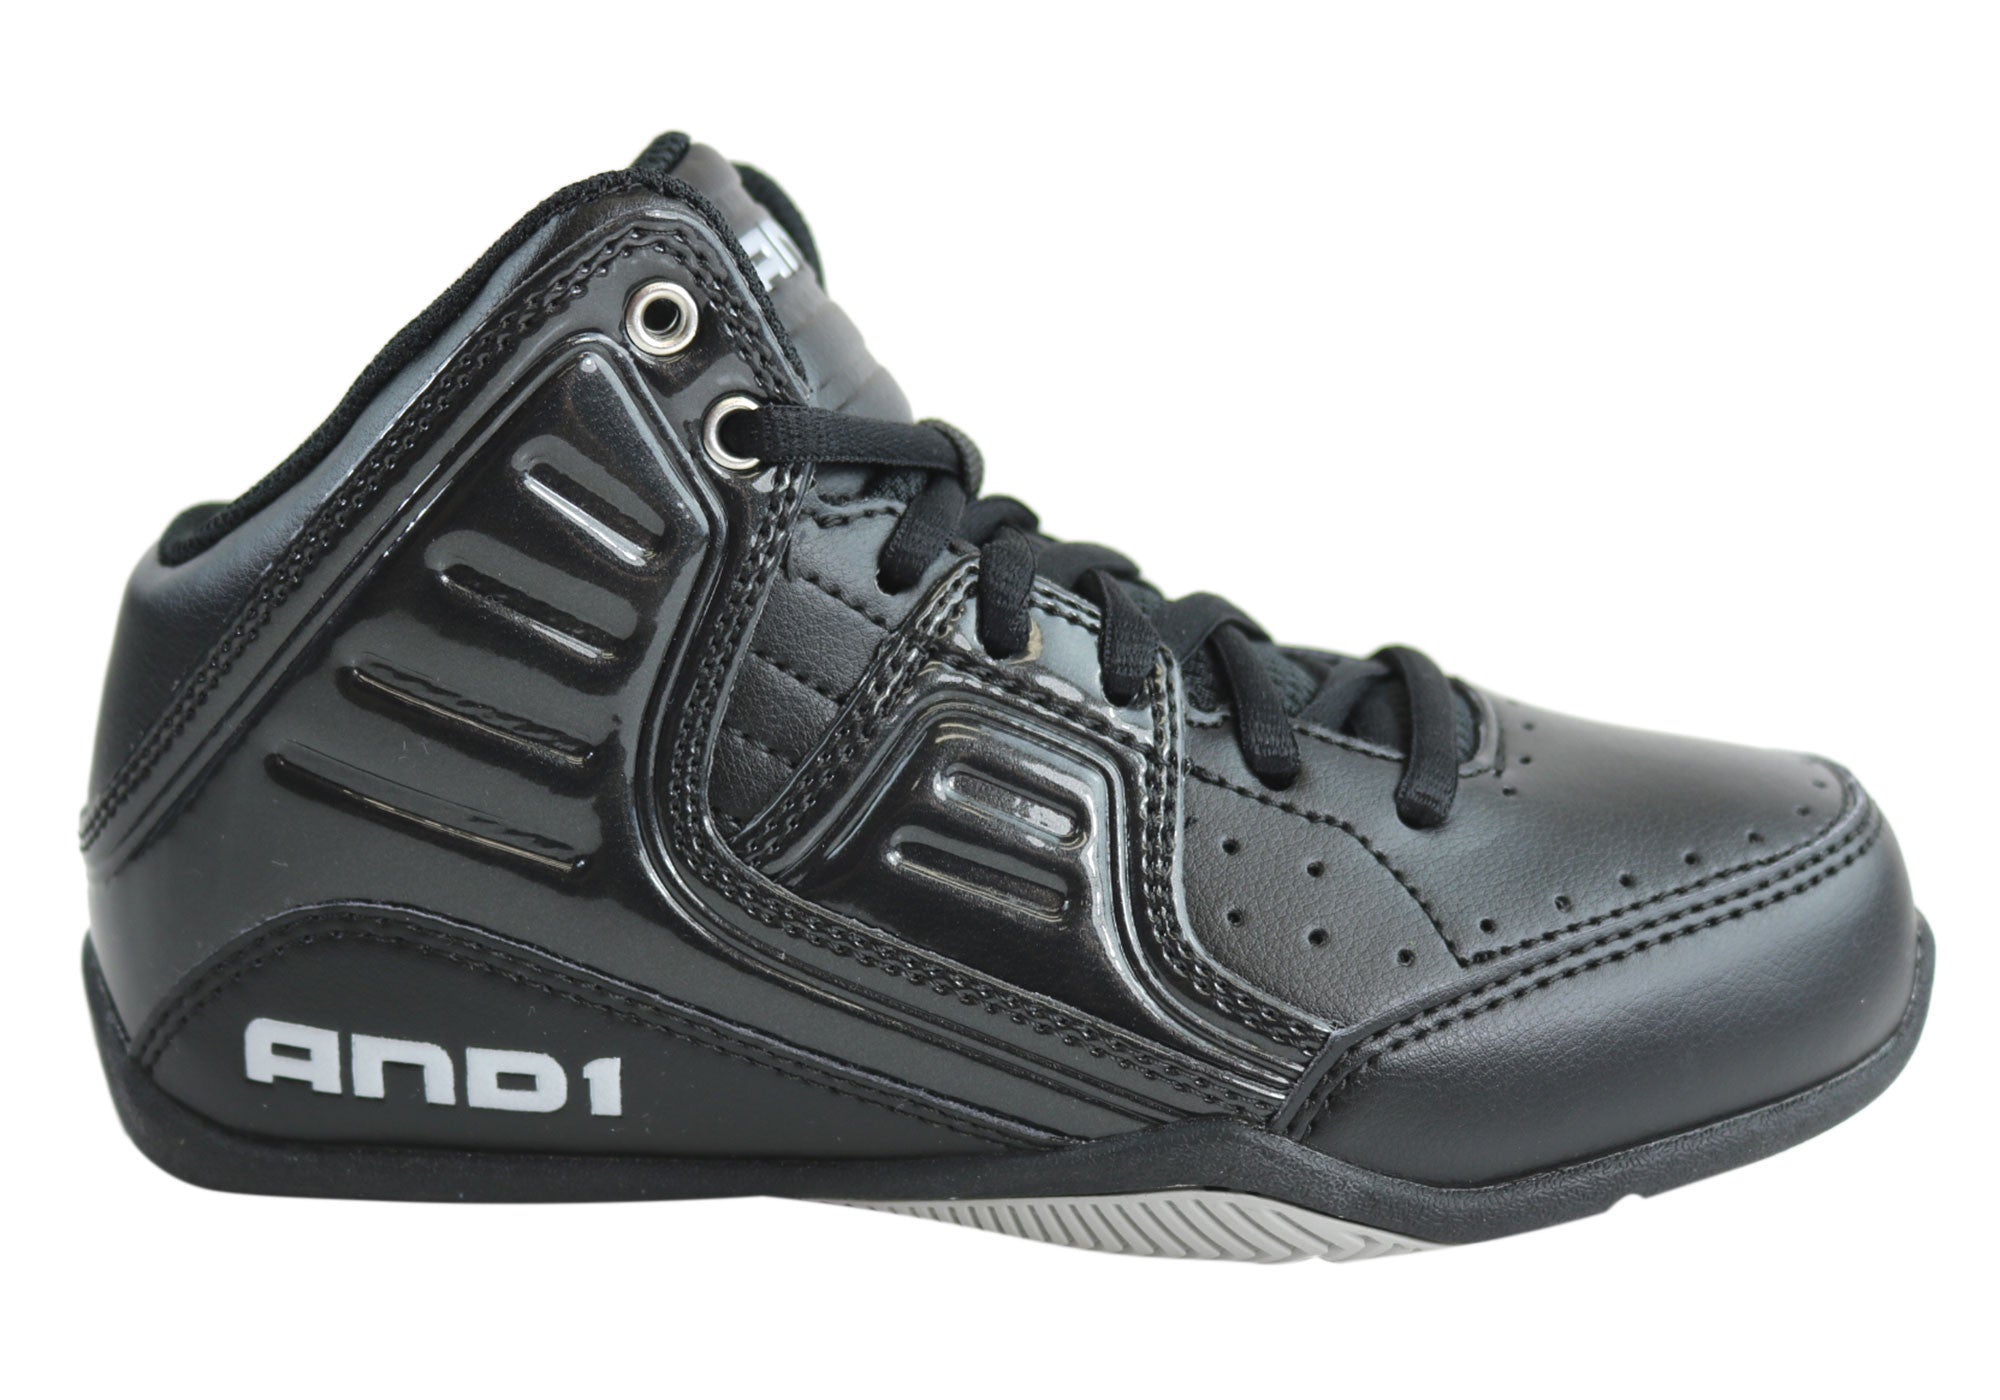 AND1 Rocket 4 Mid Kids Basketball Boots Trainers | Brand House Direct